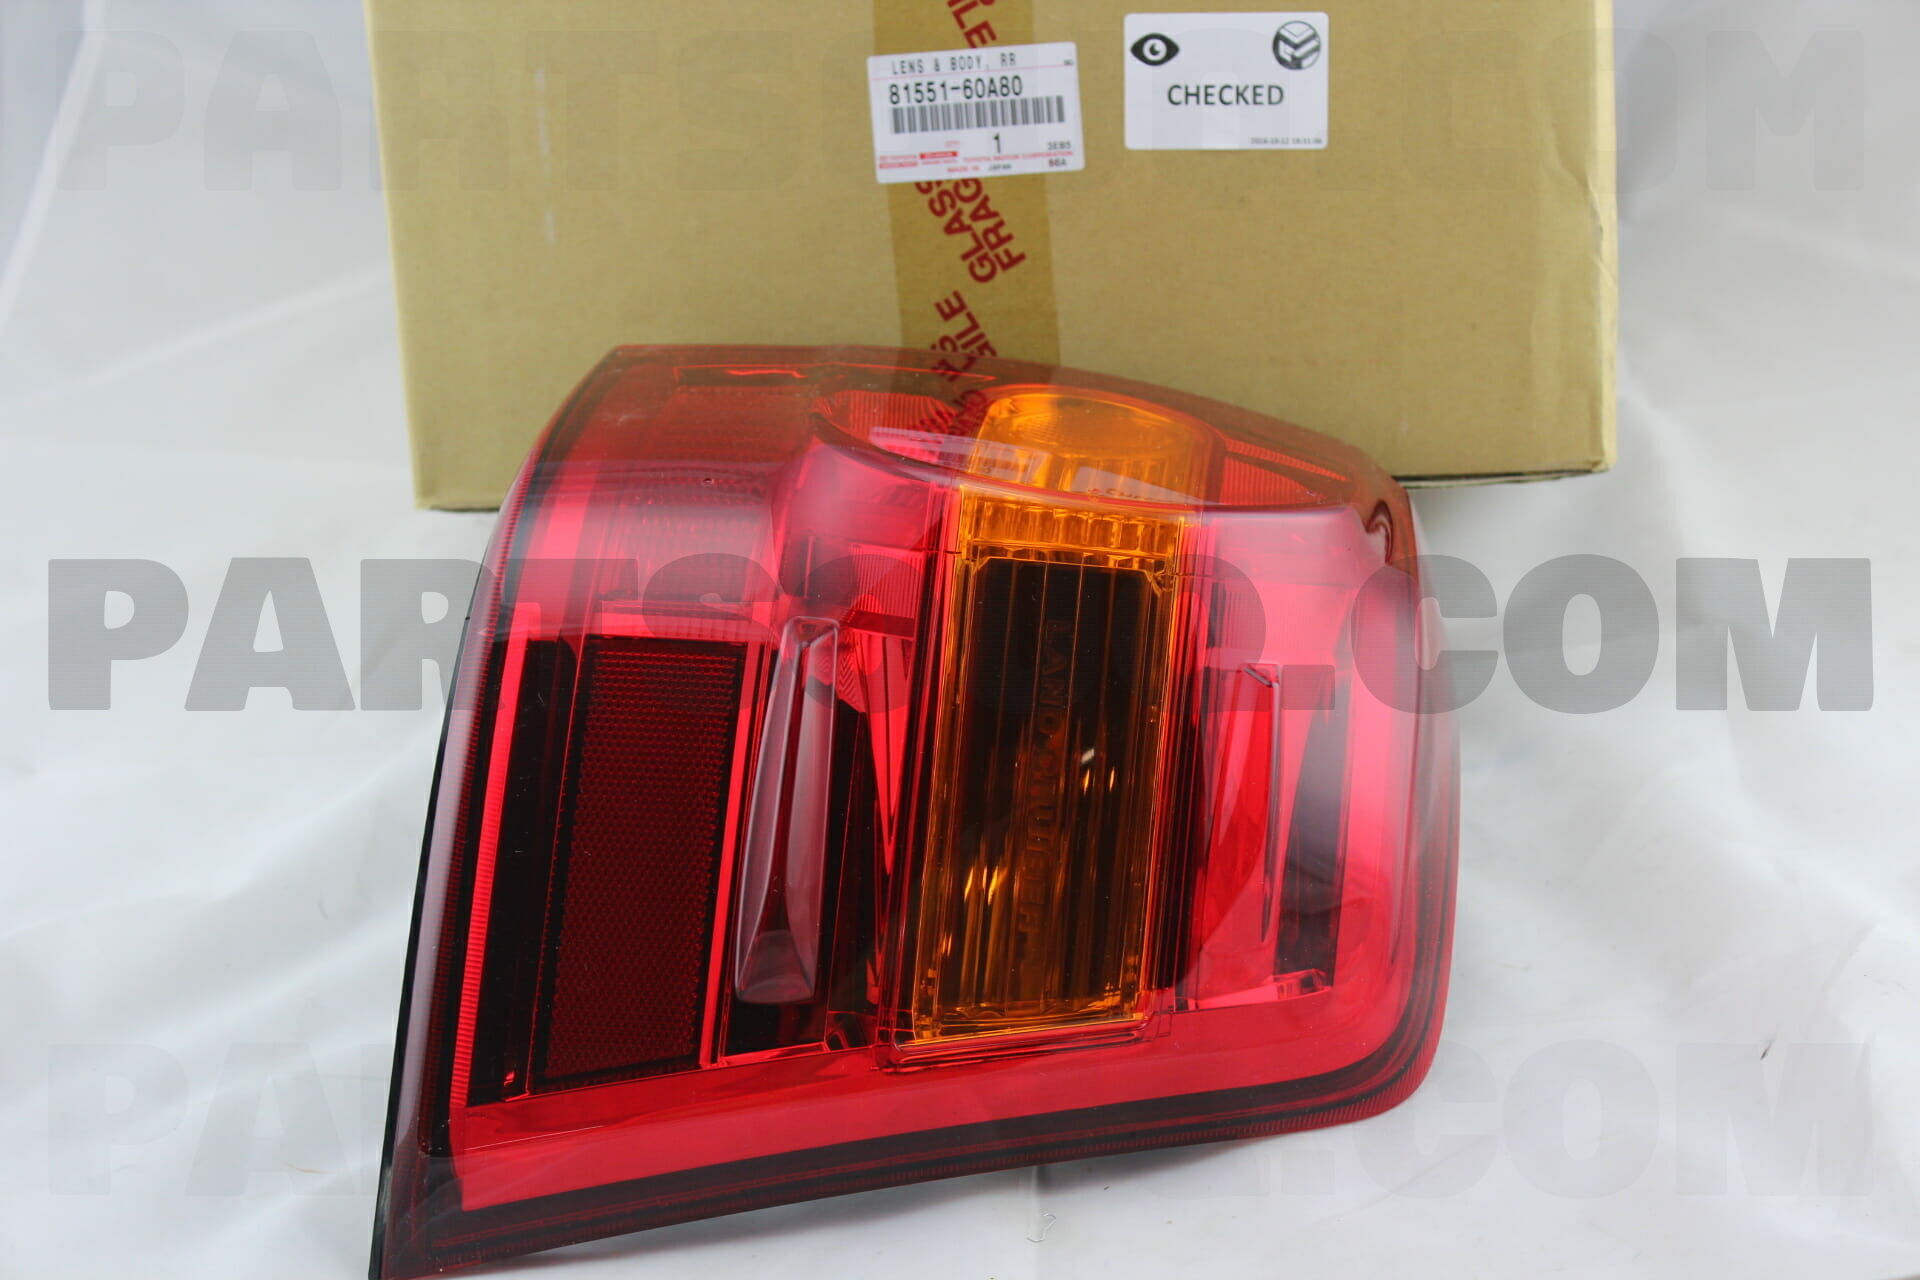 rh 8155160A31 New Genuine OEM P 81551-60A31 Toyota Lens rear combination lamp